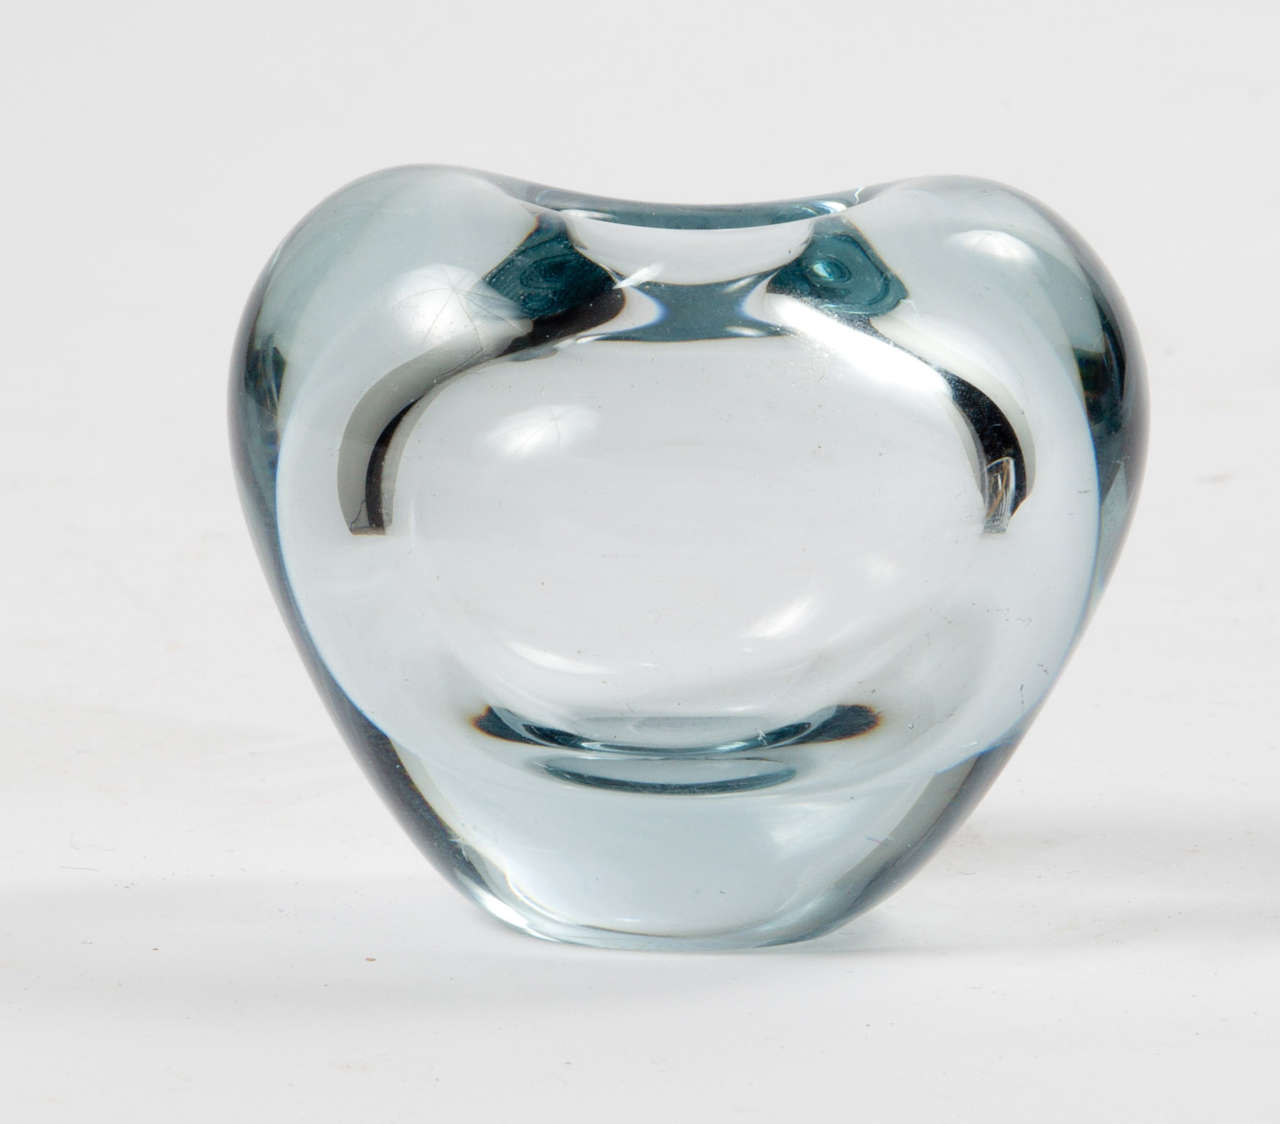 Vintage 1960s Heart Shaped Vase by Holmegaard.

This Per Lutken Glass Vase was designed in 1960. Beautiful condition to complete your collection.